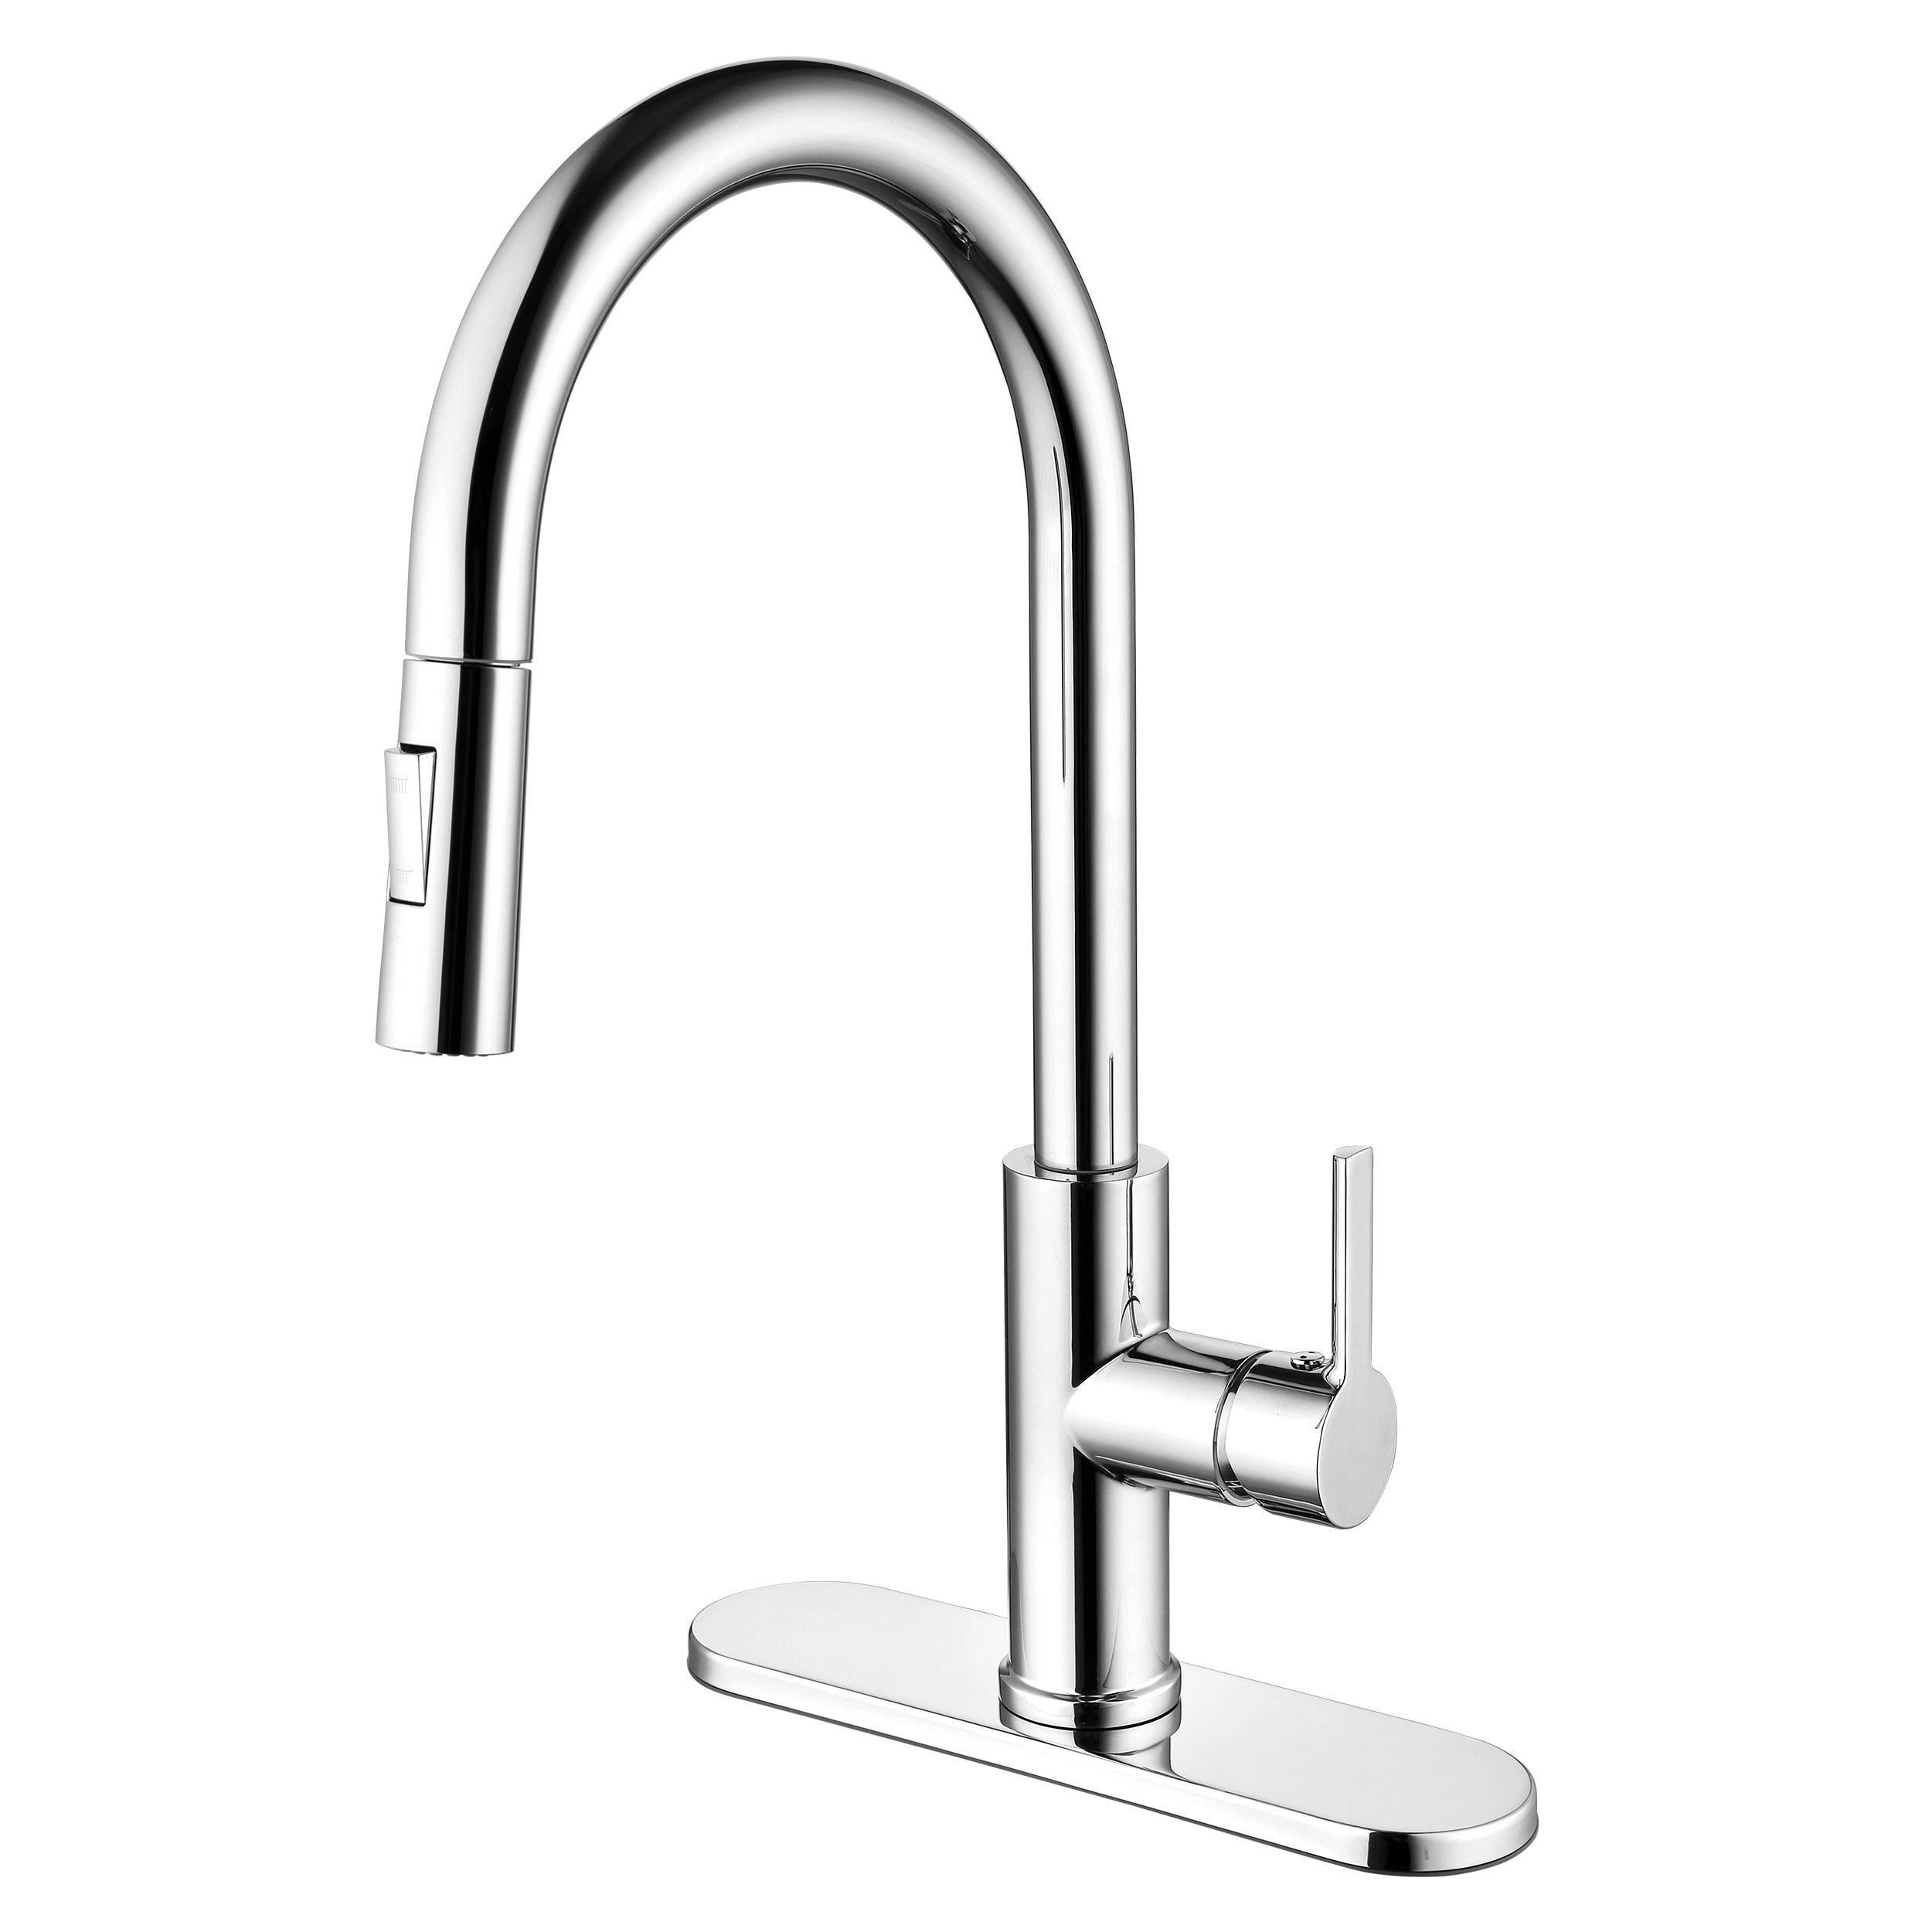 Rhiver Pull Down Chrome Kitchen Faucet